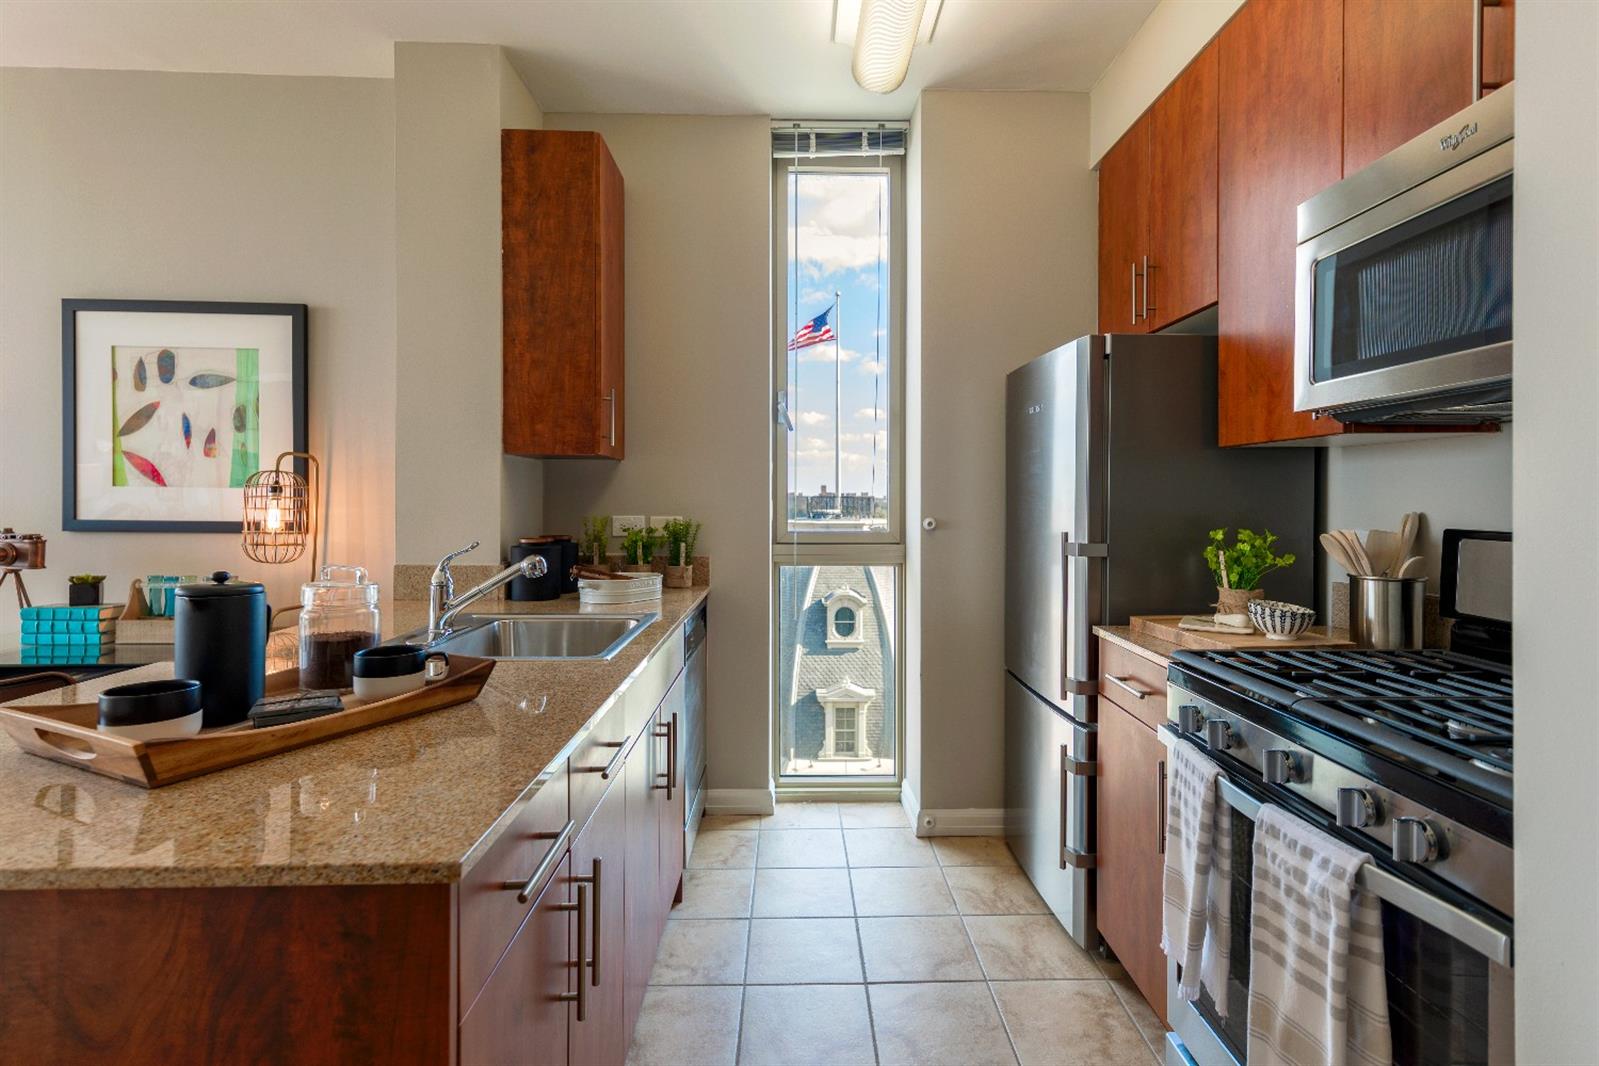 a kitchen with stainless steel appliances granite countertop a stove refrigerator sink and microwave